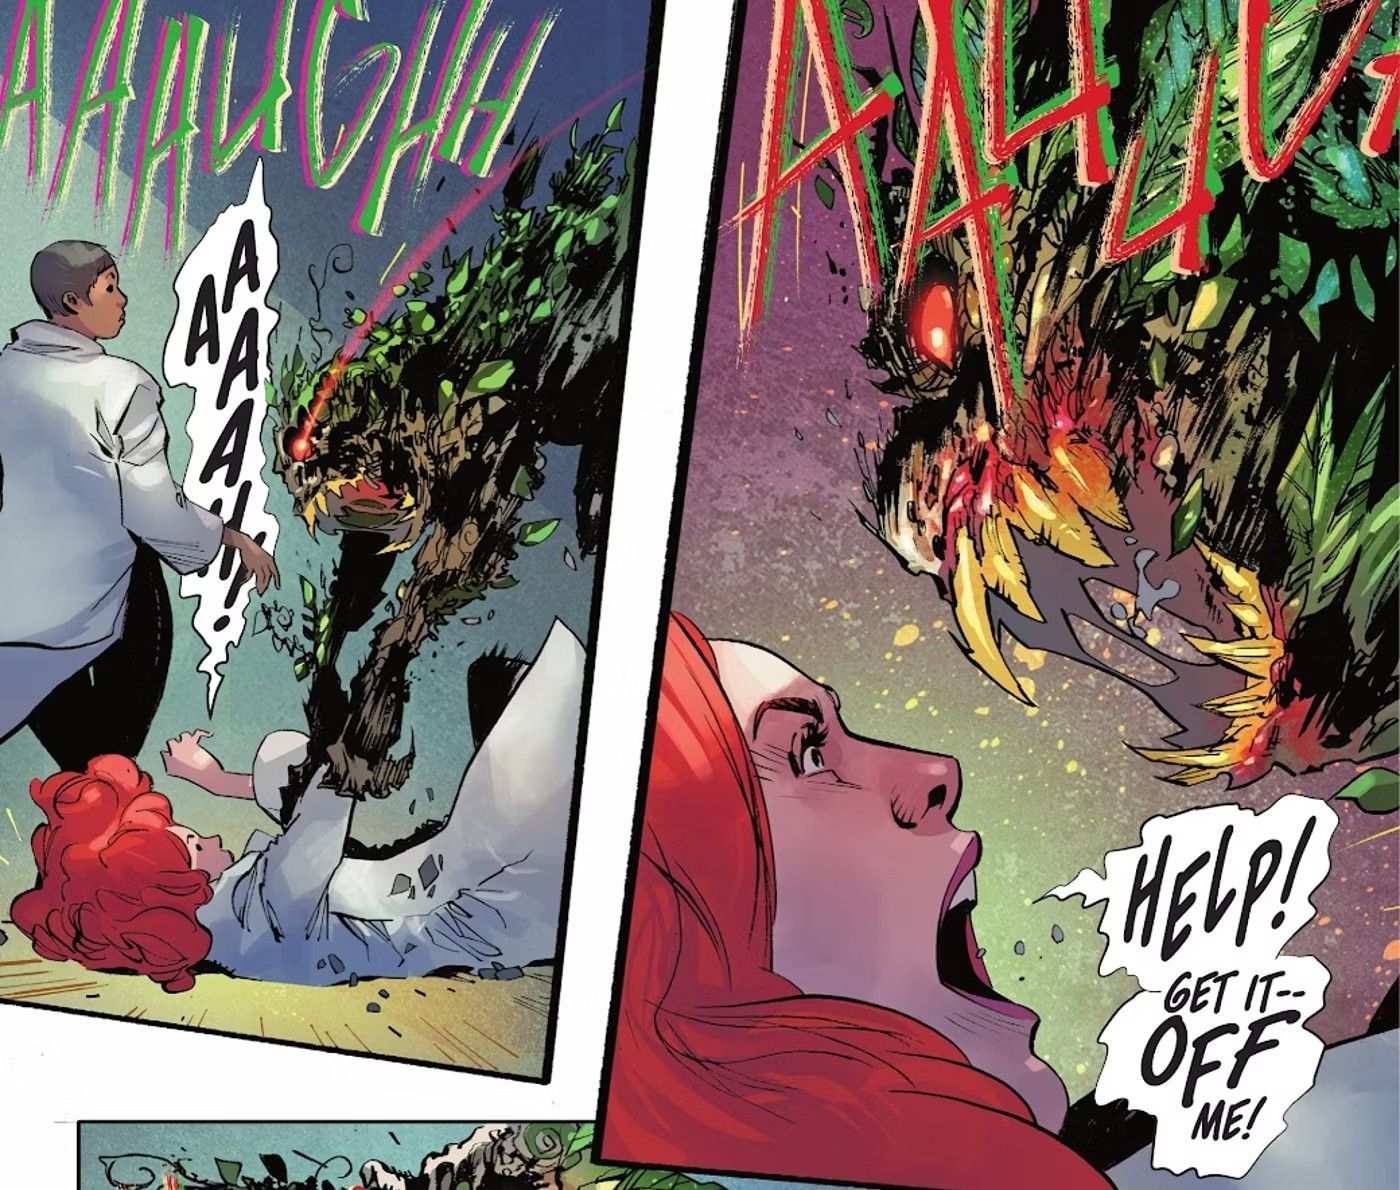 Comic book panels: a plant monster attacks Poison Ivy.